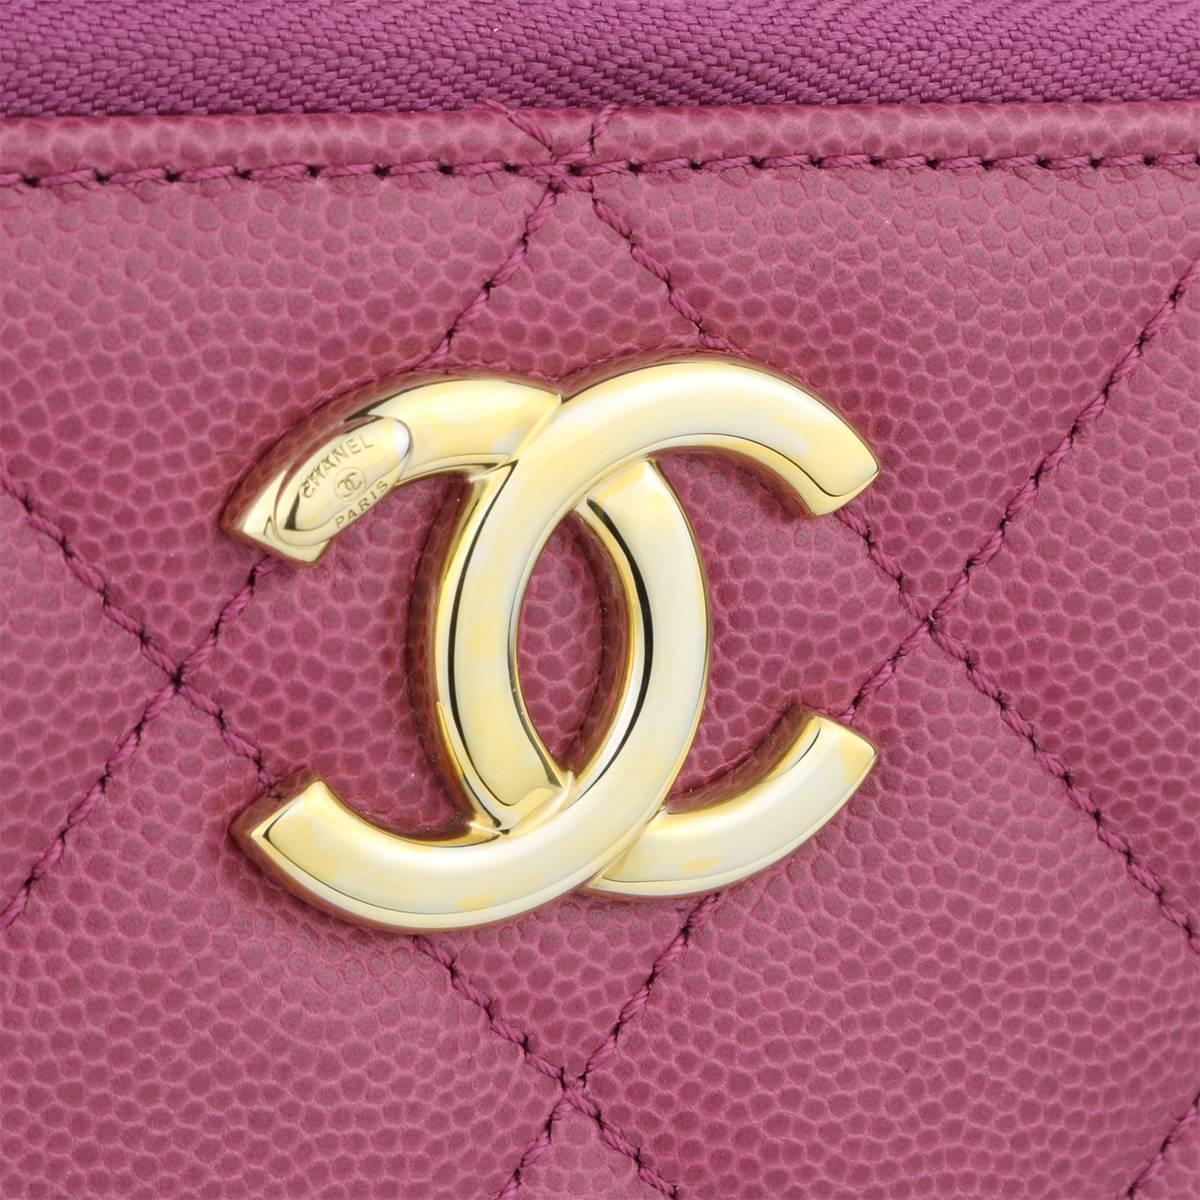 Authentic CHANEL Business Affinity Camera Case Pink Caviar with Gold Hardware 2016.

This stunning bag is in a mint condition, the bag still holds its original shape, and the hardware is still very shiny.

Exterior Condition: Mint condition, corners